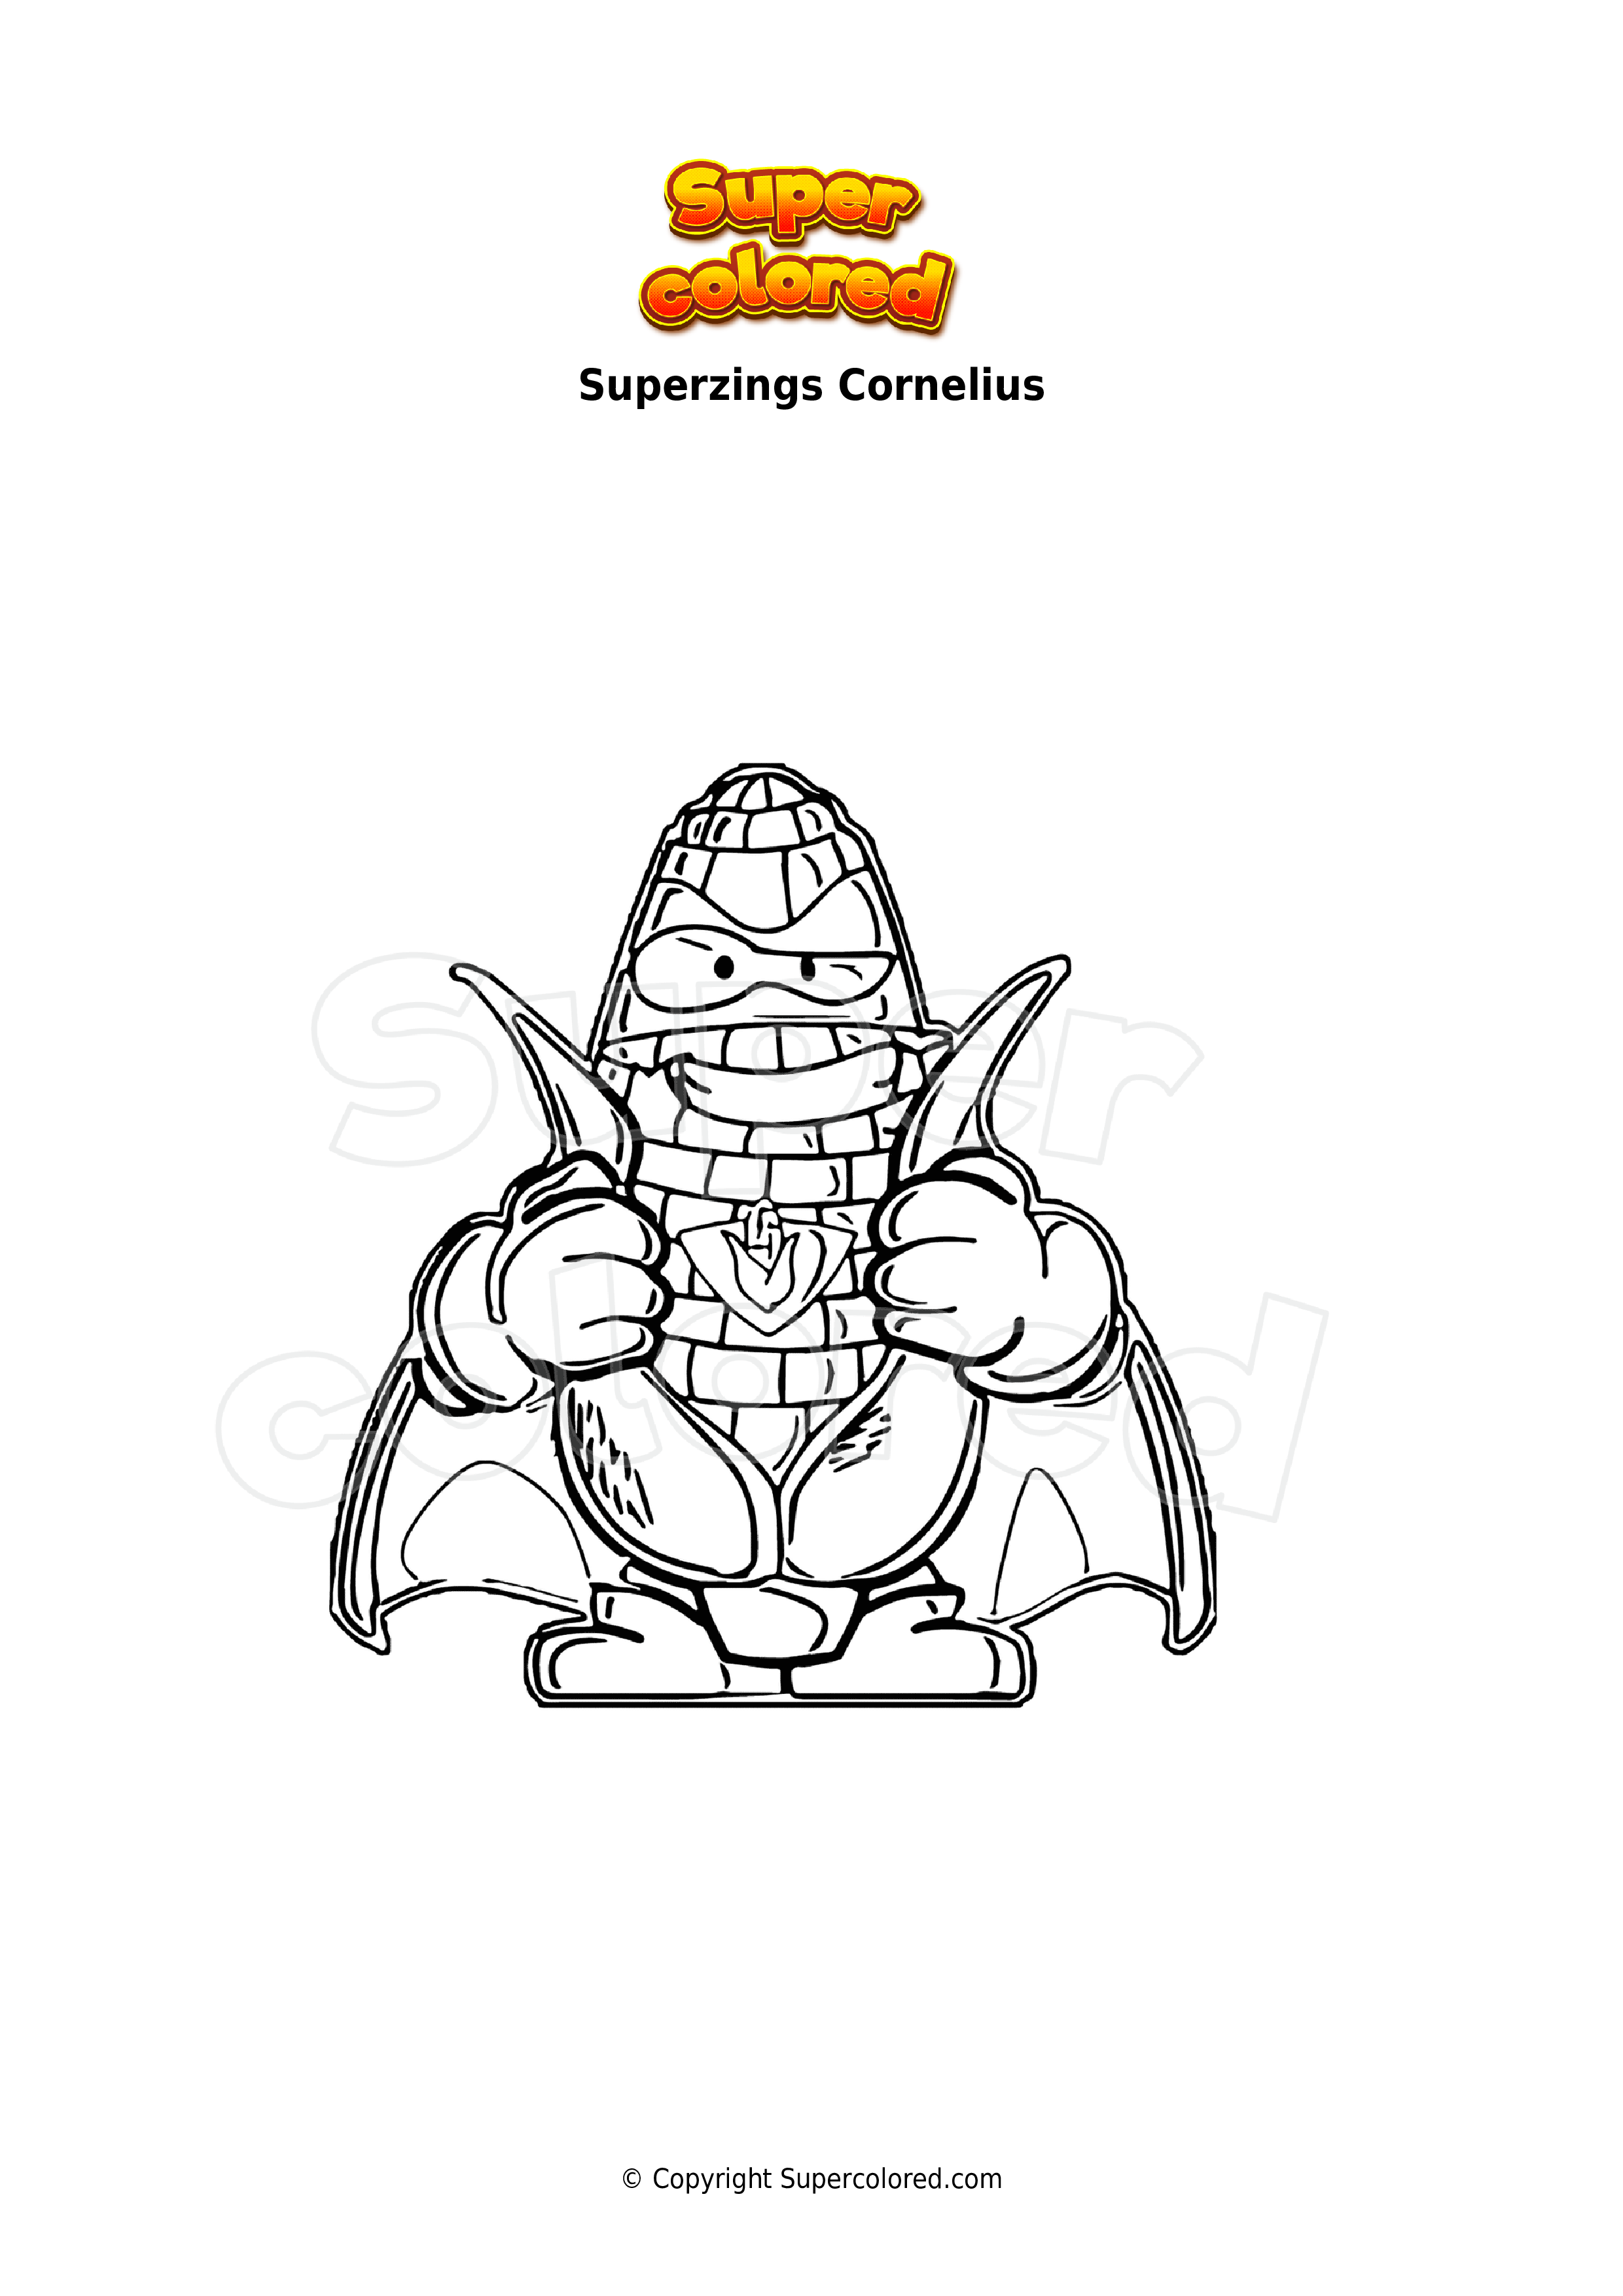 https://images.supercolored.com/coloring-page-superzings-cornelius_4b94aa.png